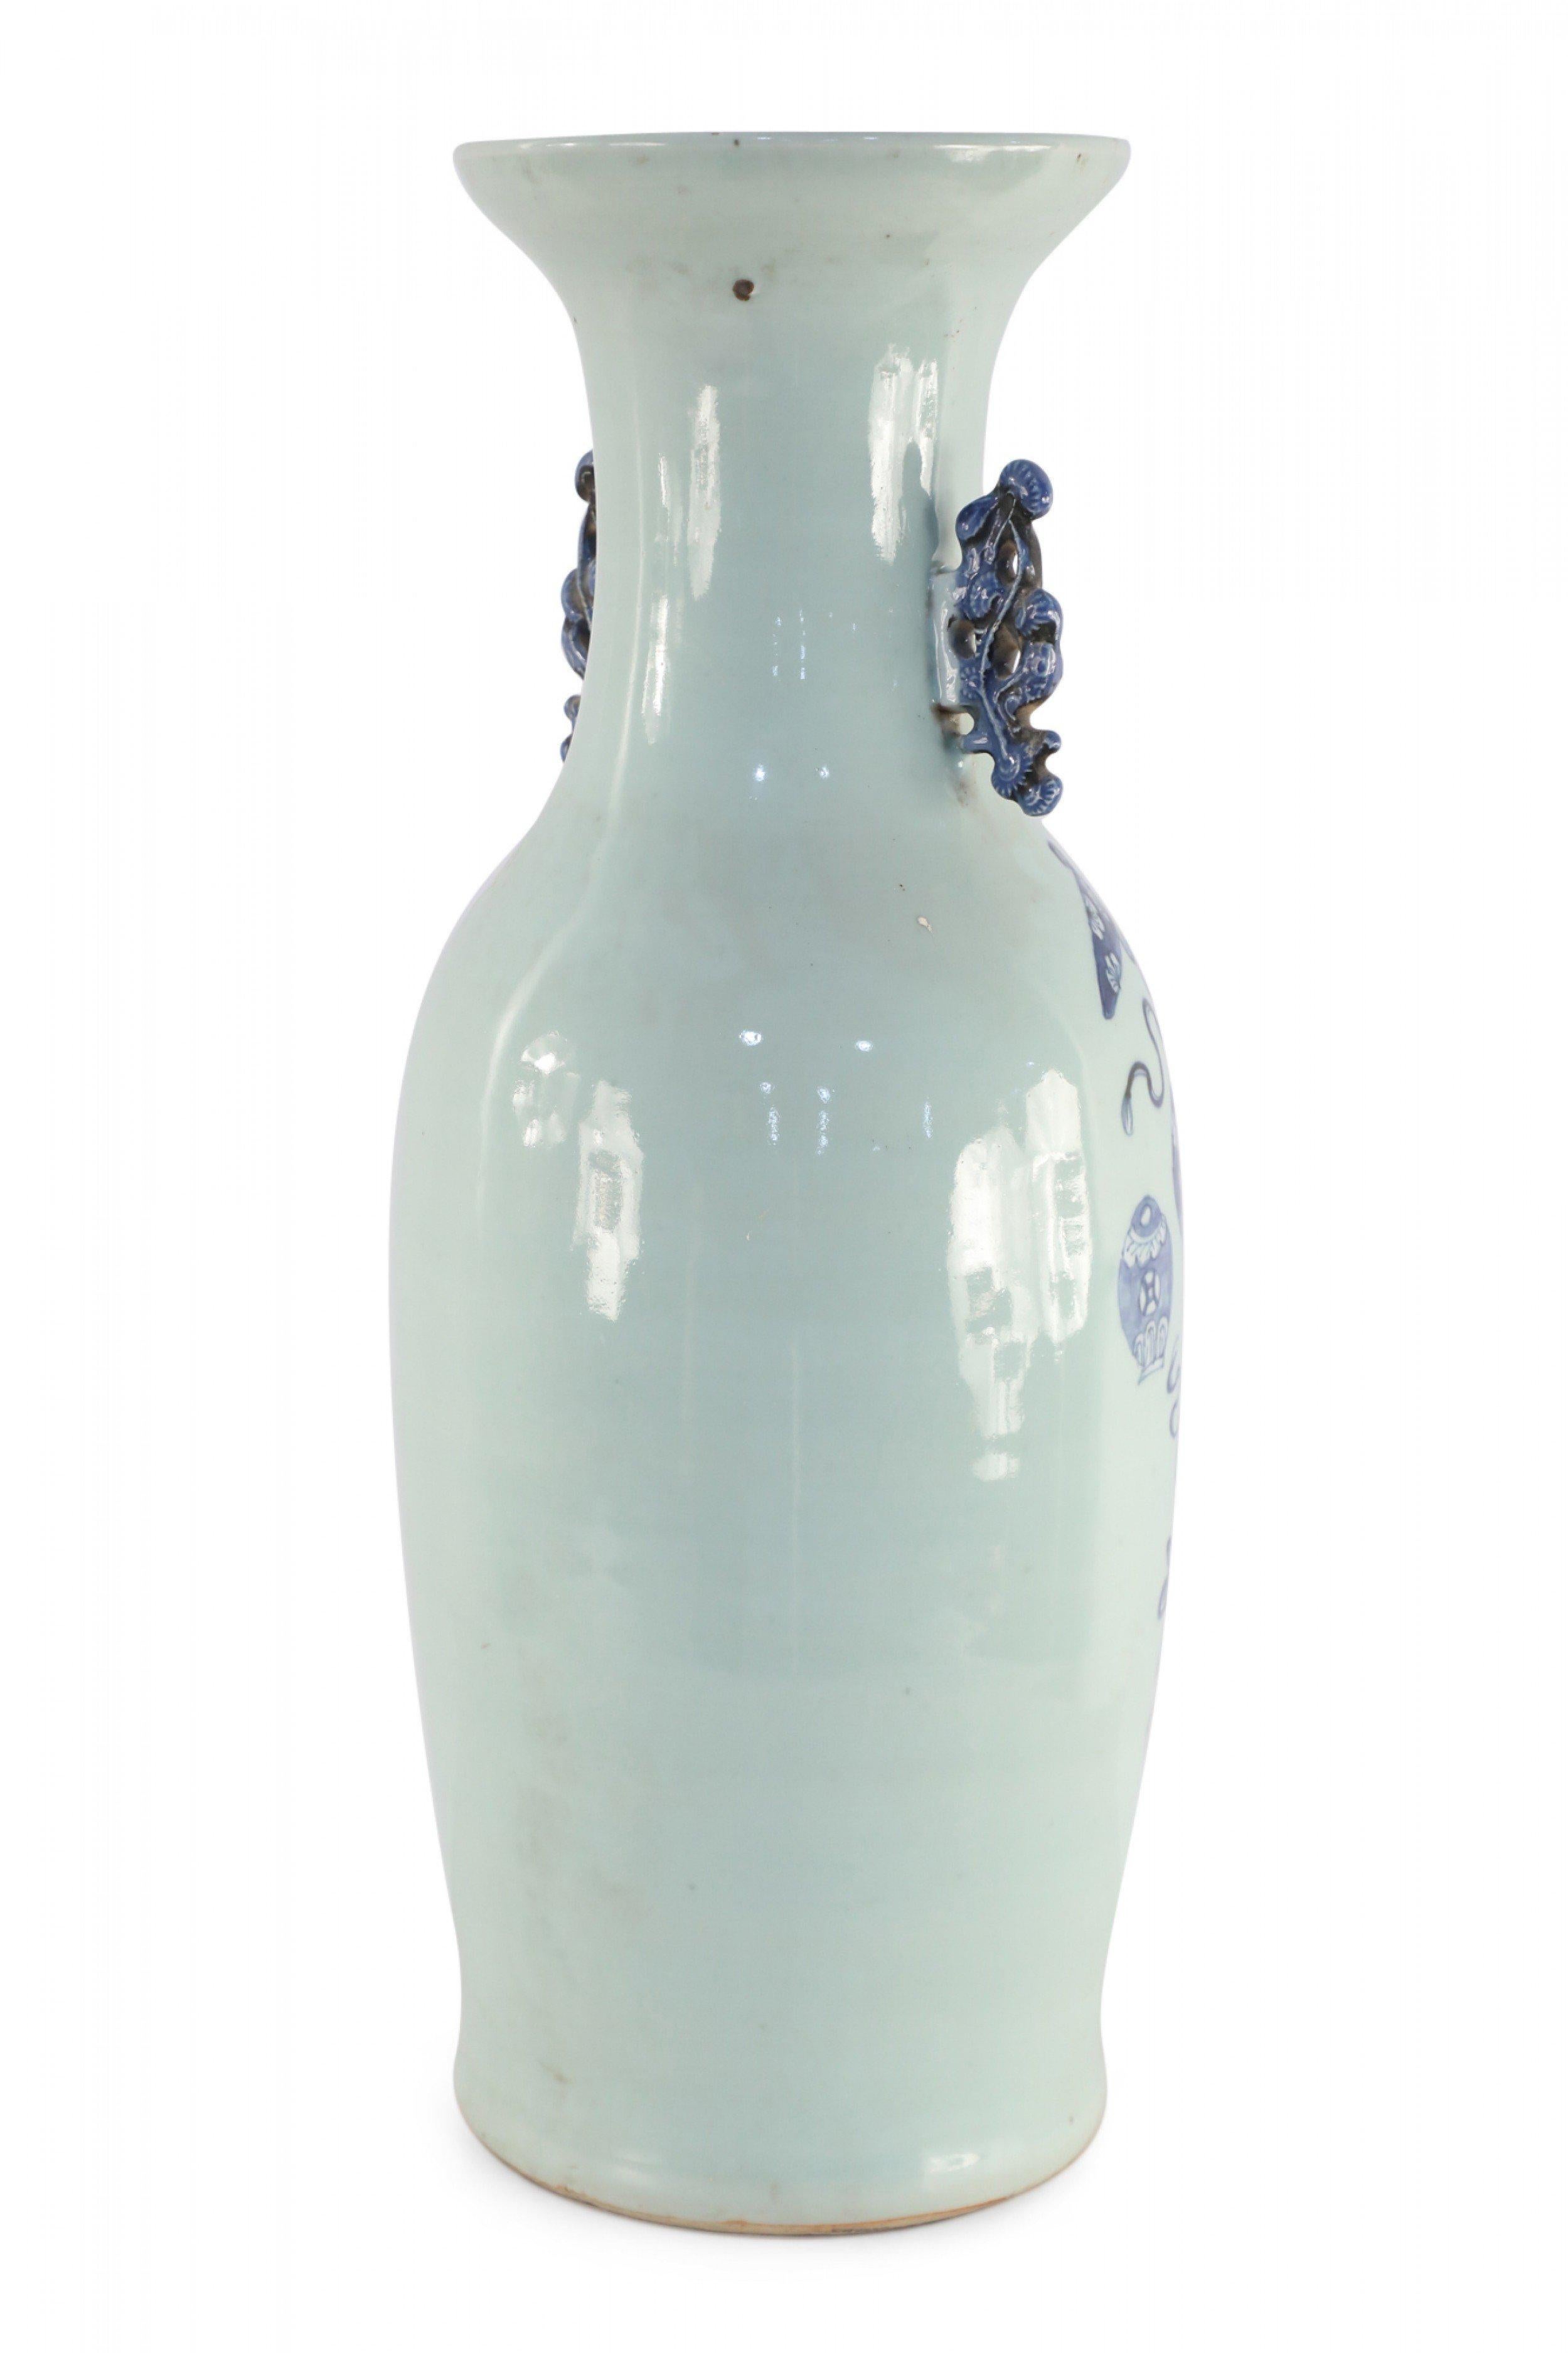 Antique Chinese (Late 19th Century) large, off-white porcelain urn painted with a blue pattern featuring Buddhist symbols and other shapes with accented blue scrolled handles.
 